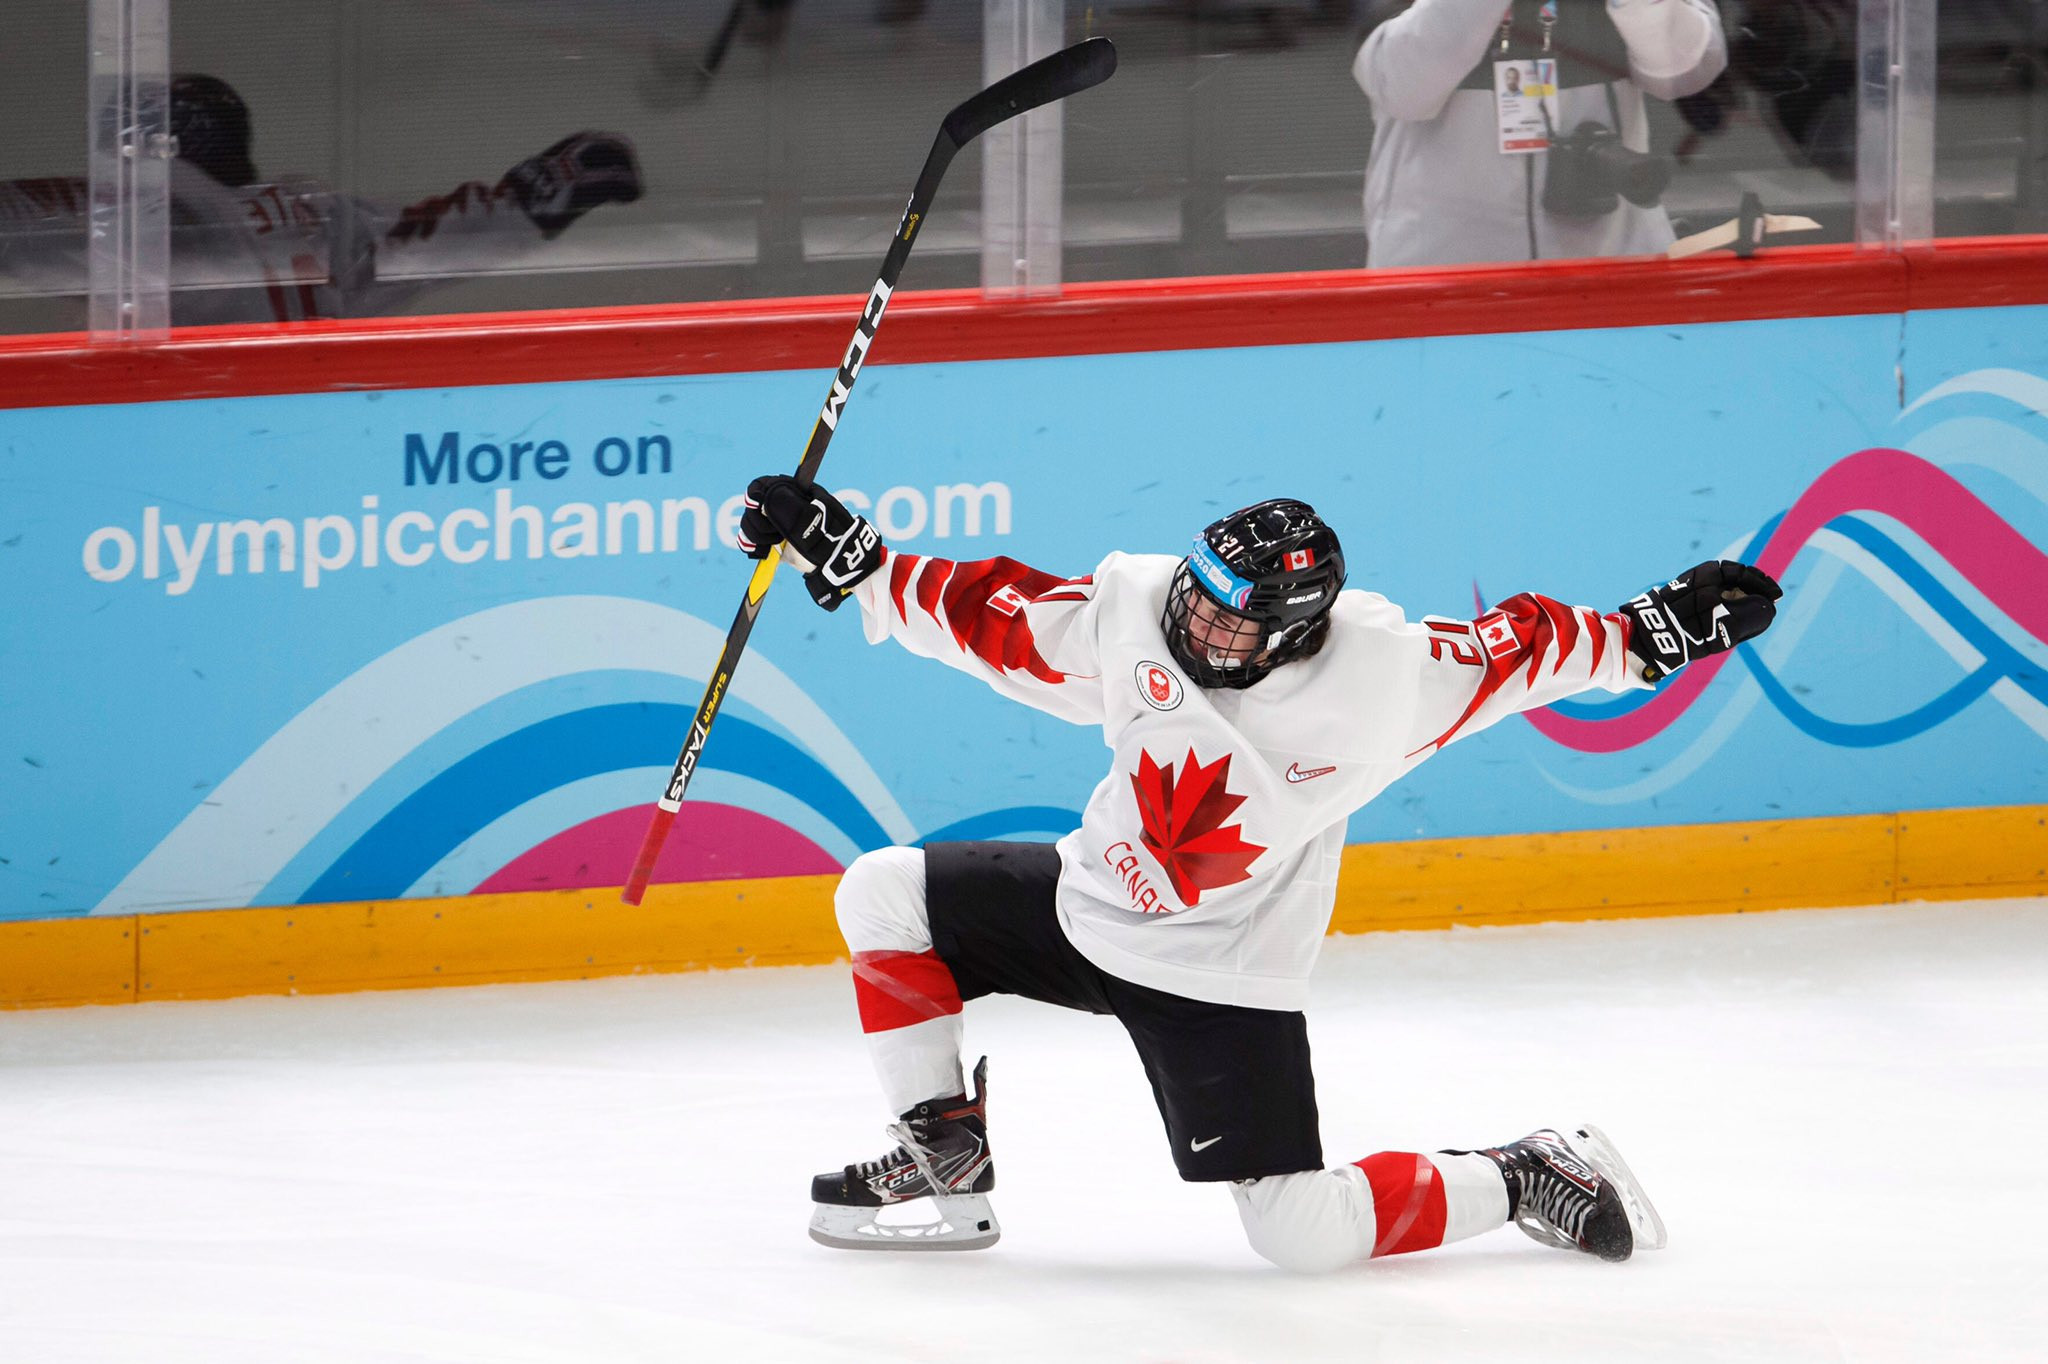 Canada were among the winners in the ice hockey tournament on day 10 ©Team Canada/Twitter